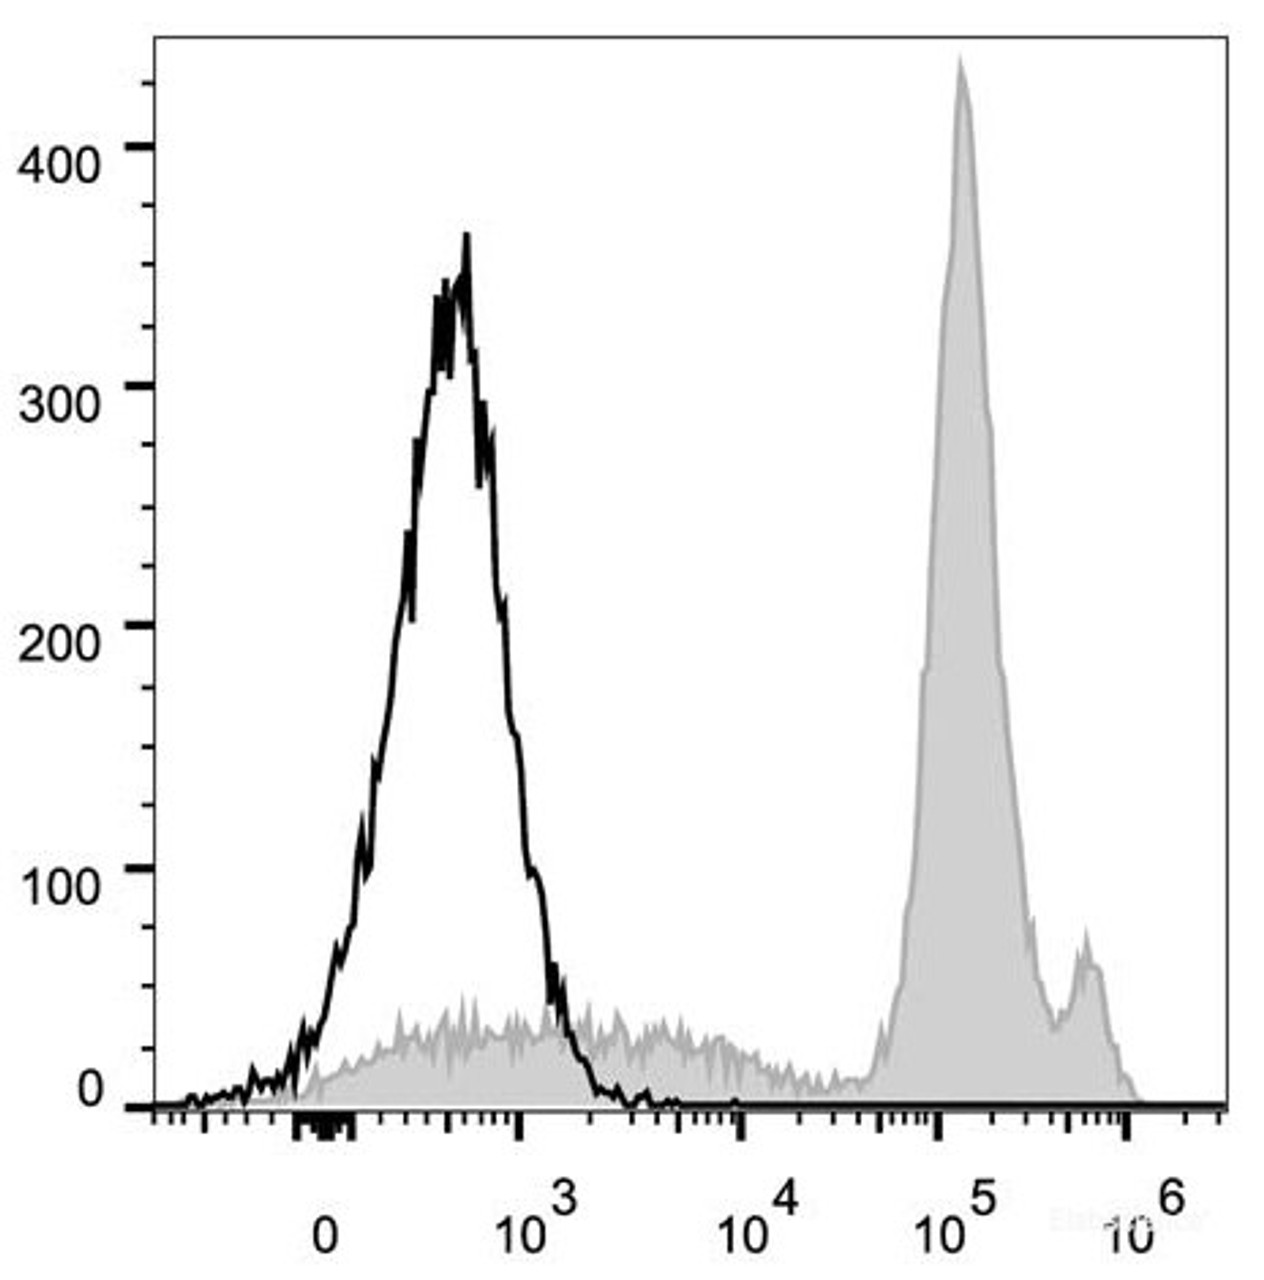 C57BL/6 murine bone marrow cells are stained with FITC Anti-Mouse Ly6C Antibody[Used at .2 μg/1<sup>6</sup> cells dilution](filled gray histogram). Unstained bone marrow cells (empty black histogram) are used as control.